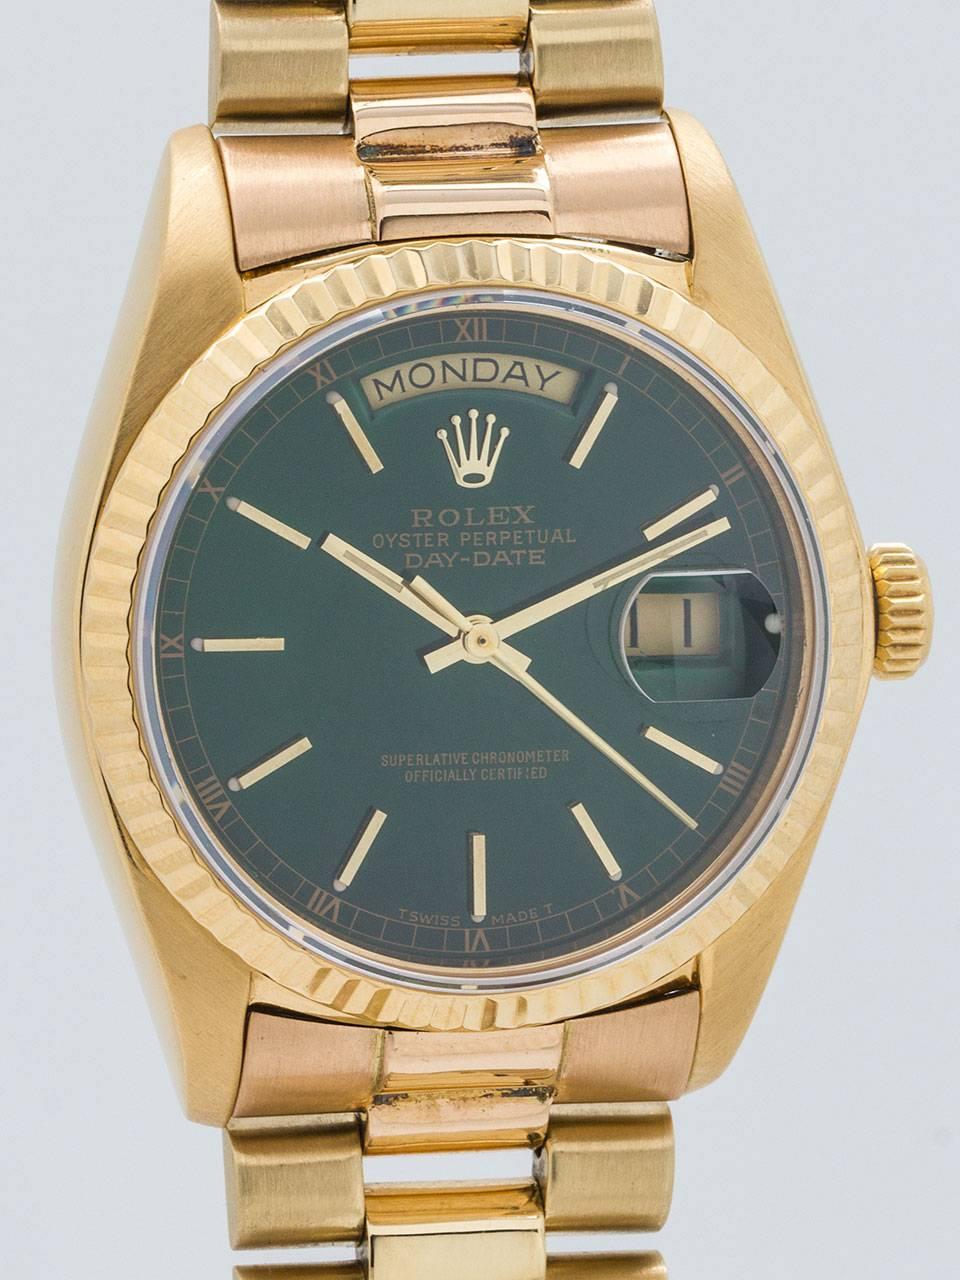 Rolex 18K Yellow Gold Day Date President ref 18038 serial number 5.3 million circa 1978. 36mm diameter Oyster case with fluted bezel and sapphire crystal. Gorgeous original Rolex dial with applied gold indexes and hands which has been custom colored